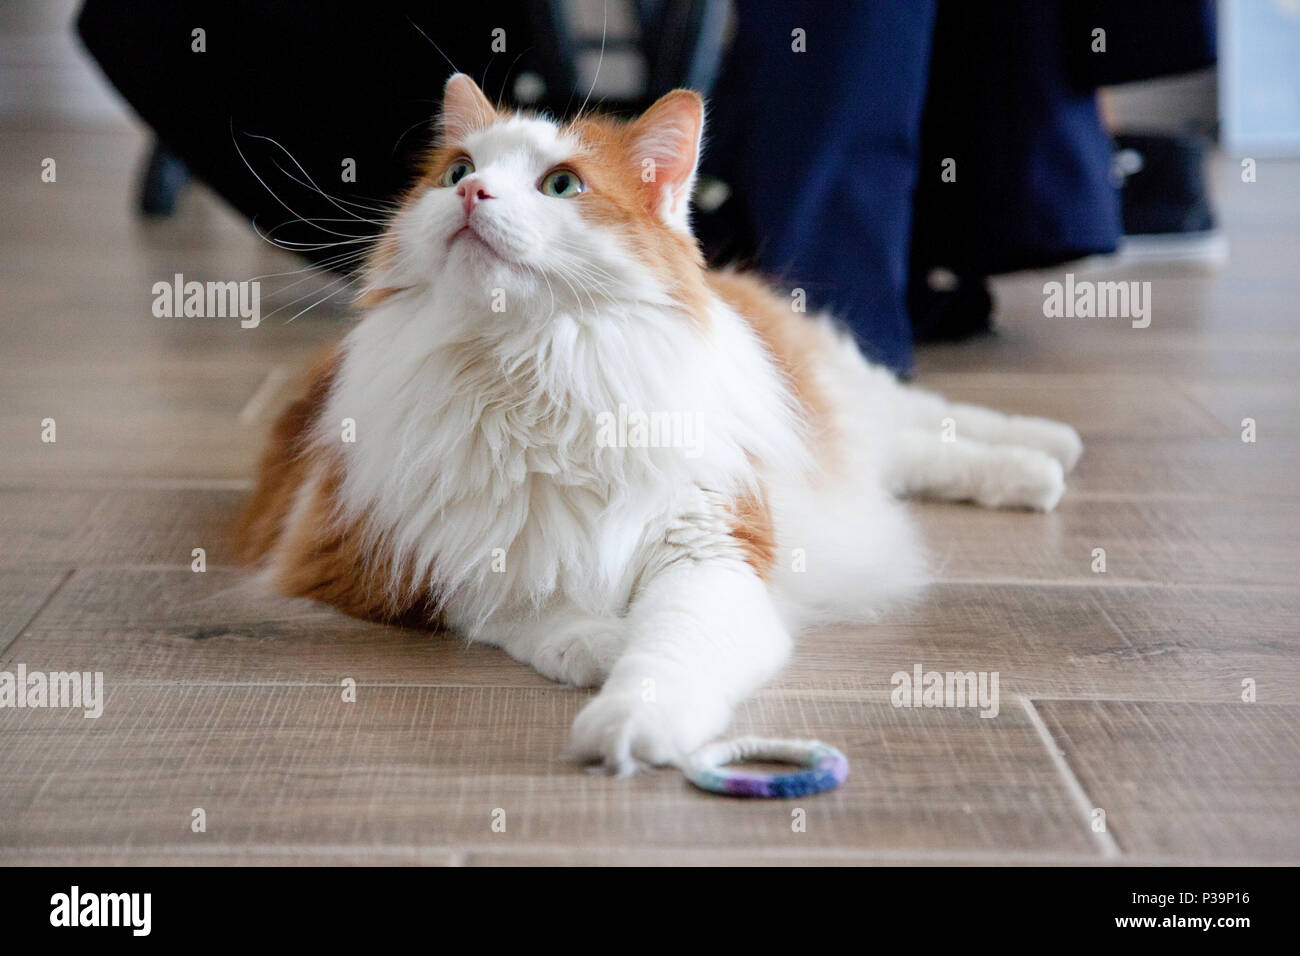 An orange and white cat with an elastic toy looks up from the floor Stock Photo